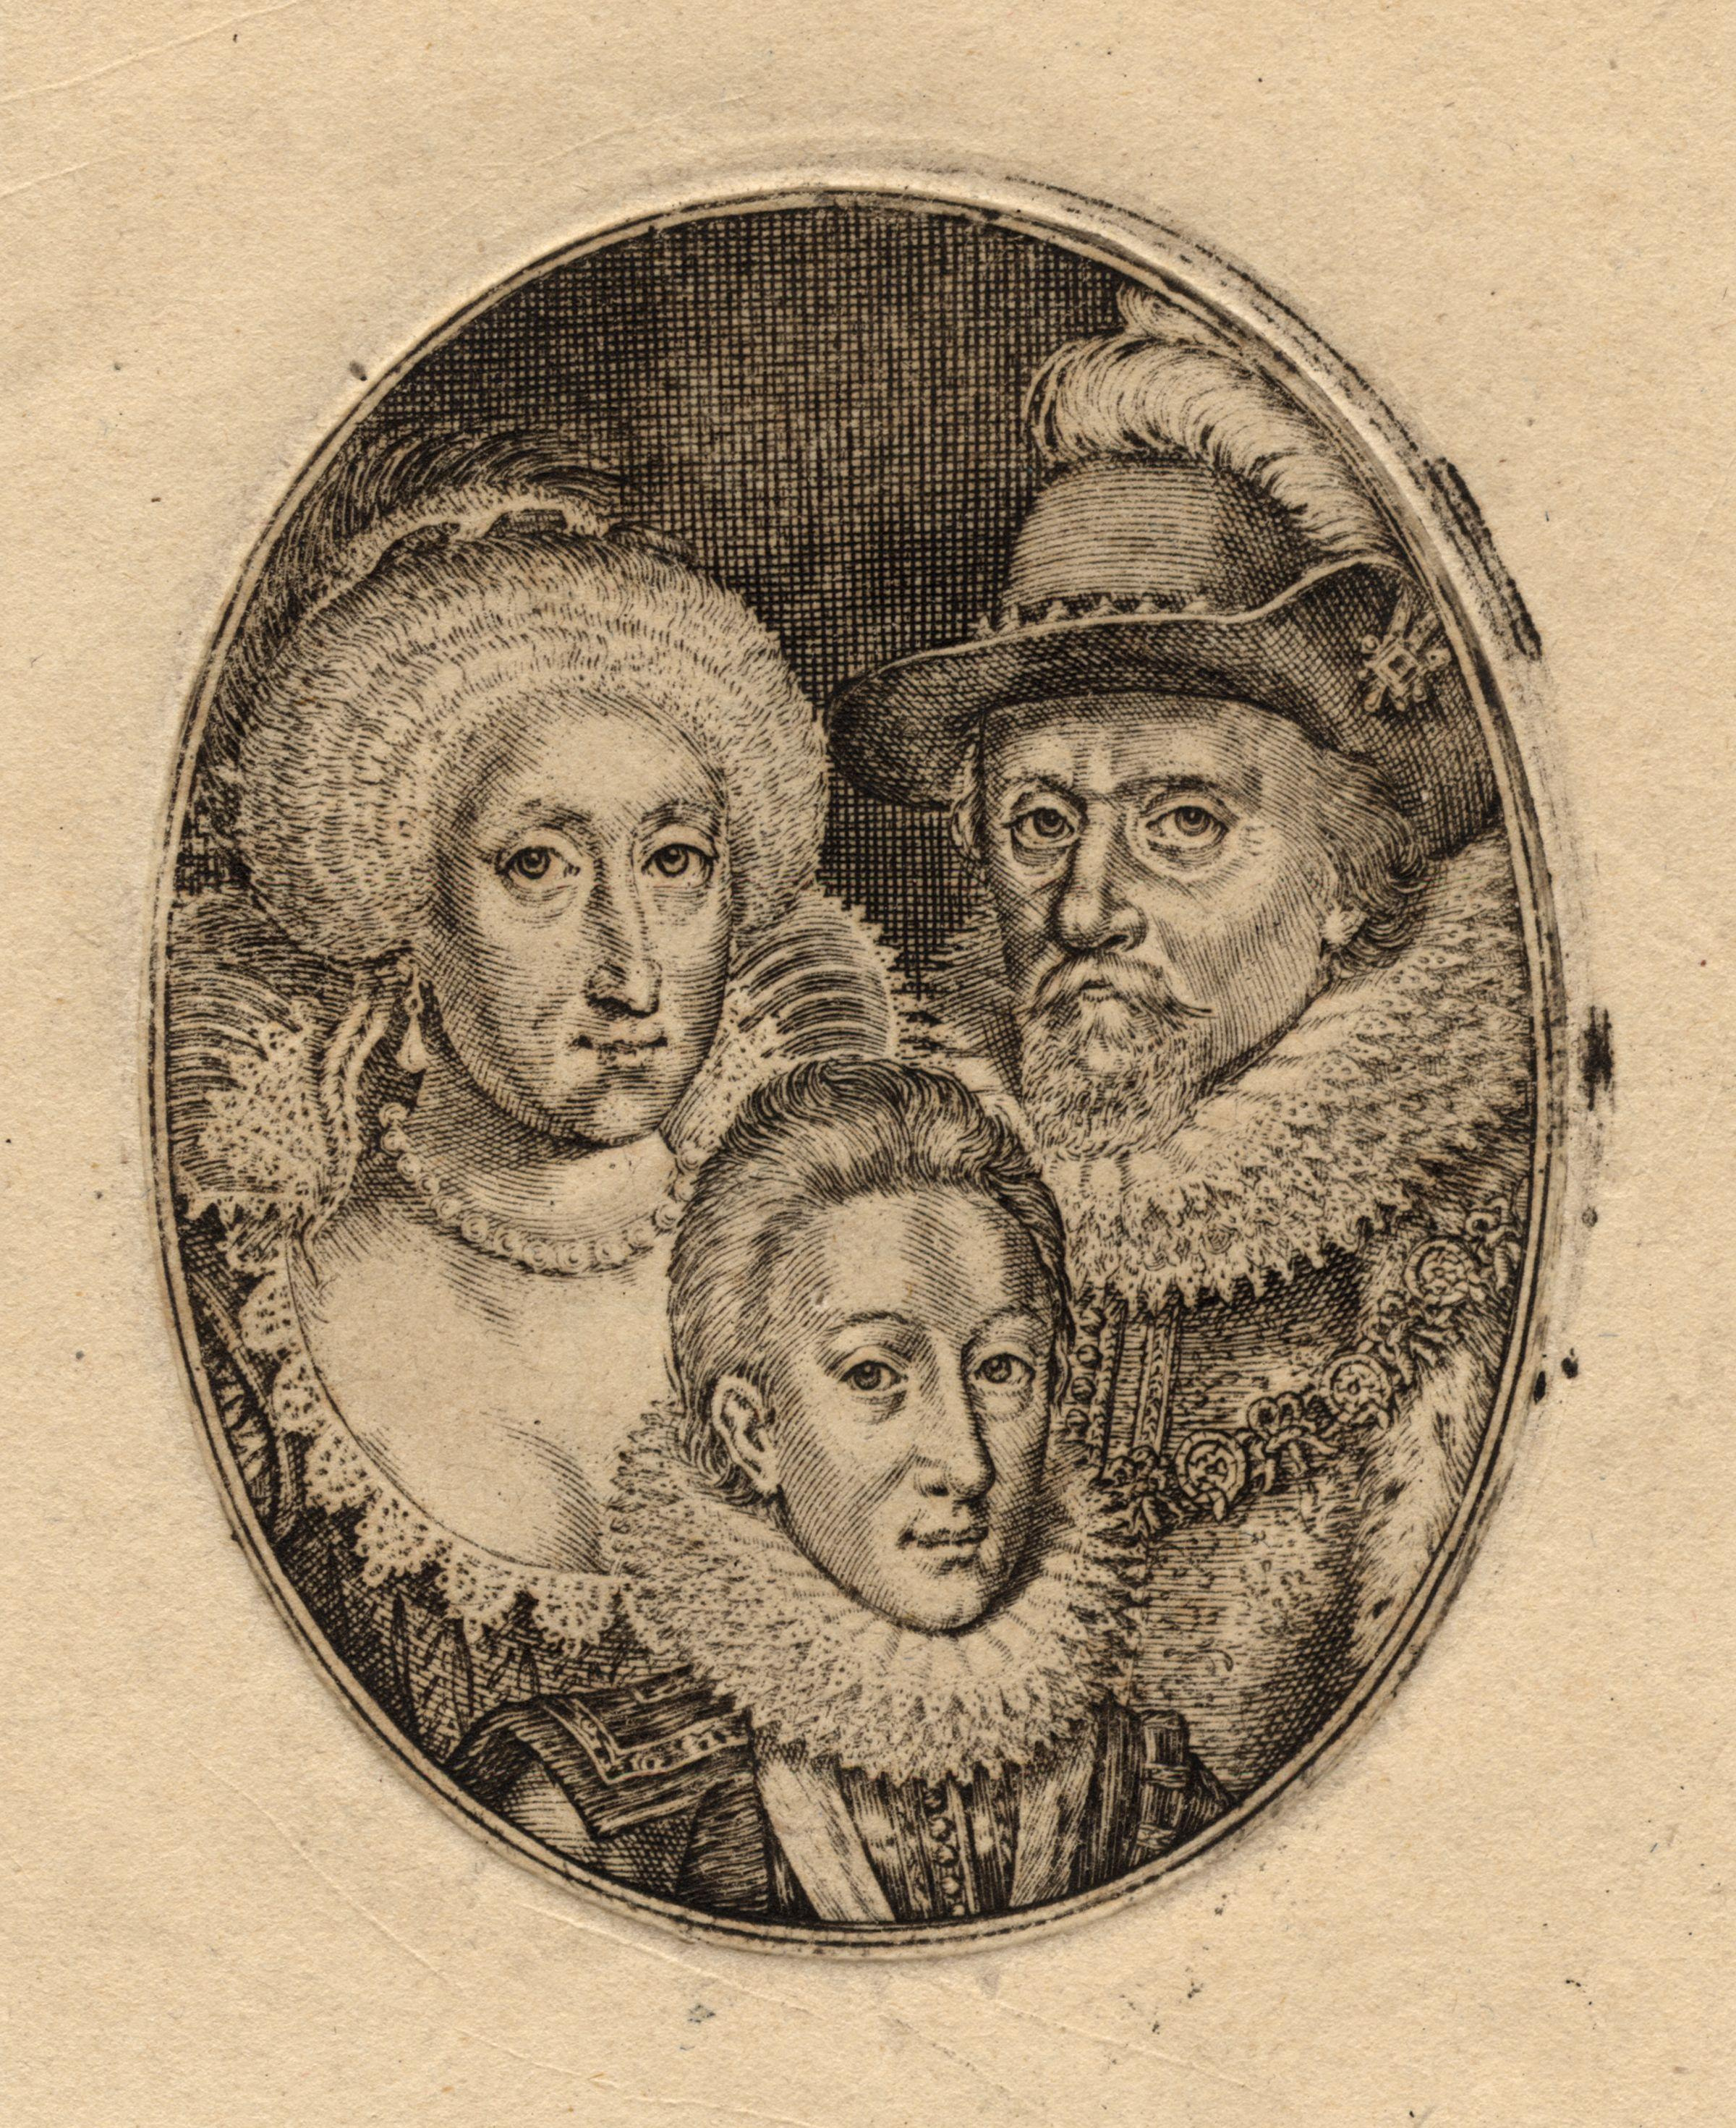 Engraving of Anne of Denmark, Charles I (in boyhood), and James VI and I by Simon van de Passe. Image courtesy of the National Portrait Gallery (UK).